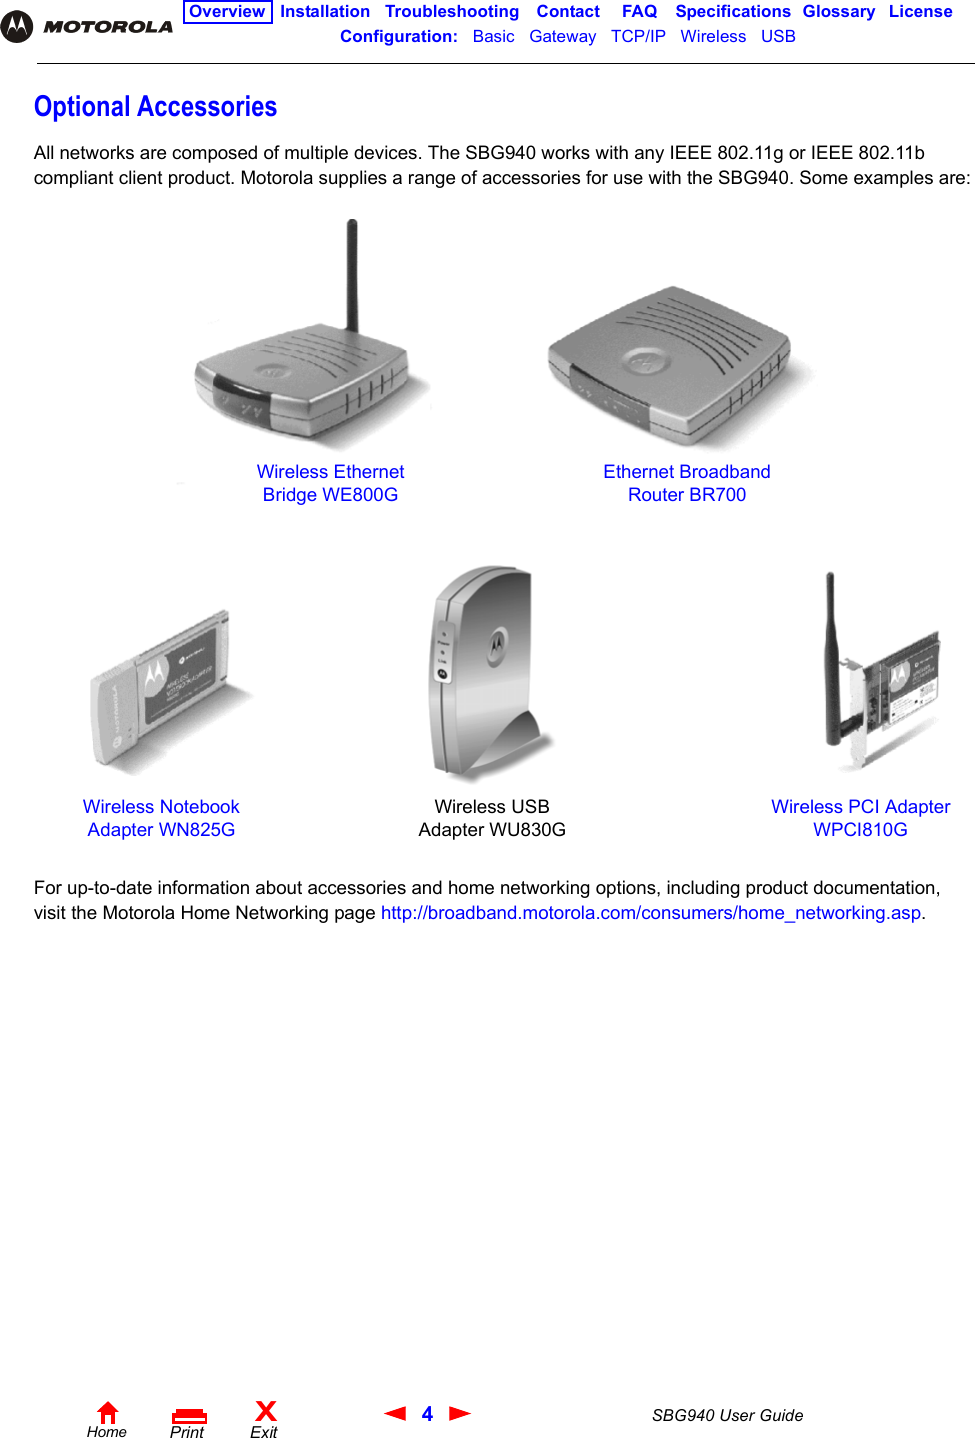 4SBG940 User GuideHomeXExitPrintOverview Installation Troubleshooting Contact FAQ Specifications Glossary LicenseConfiguration:   Basic   Gateway   TCP/IP   Wireless   USB   Optional AccessoriesAll networks are composed of multiple devices. The SBG940 works with any IEEE 802.11g or IEEE 802.11b compliant client product. Motorola supplies a range of accessories for use with the SBG940. Some examples are:For up-to-date information about accessories and home networking options, including product documentation, visit the Motorola Home Networking page http://broadband.motorola.com/consumers/home_networking.asp. Wireless Ethernet Bridge WE800GEthernet Broadband Router BR700Wireless Notebook Adapter WN825GWireless PCI Adapter WPCI810GWireless USB Adapter WU830G